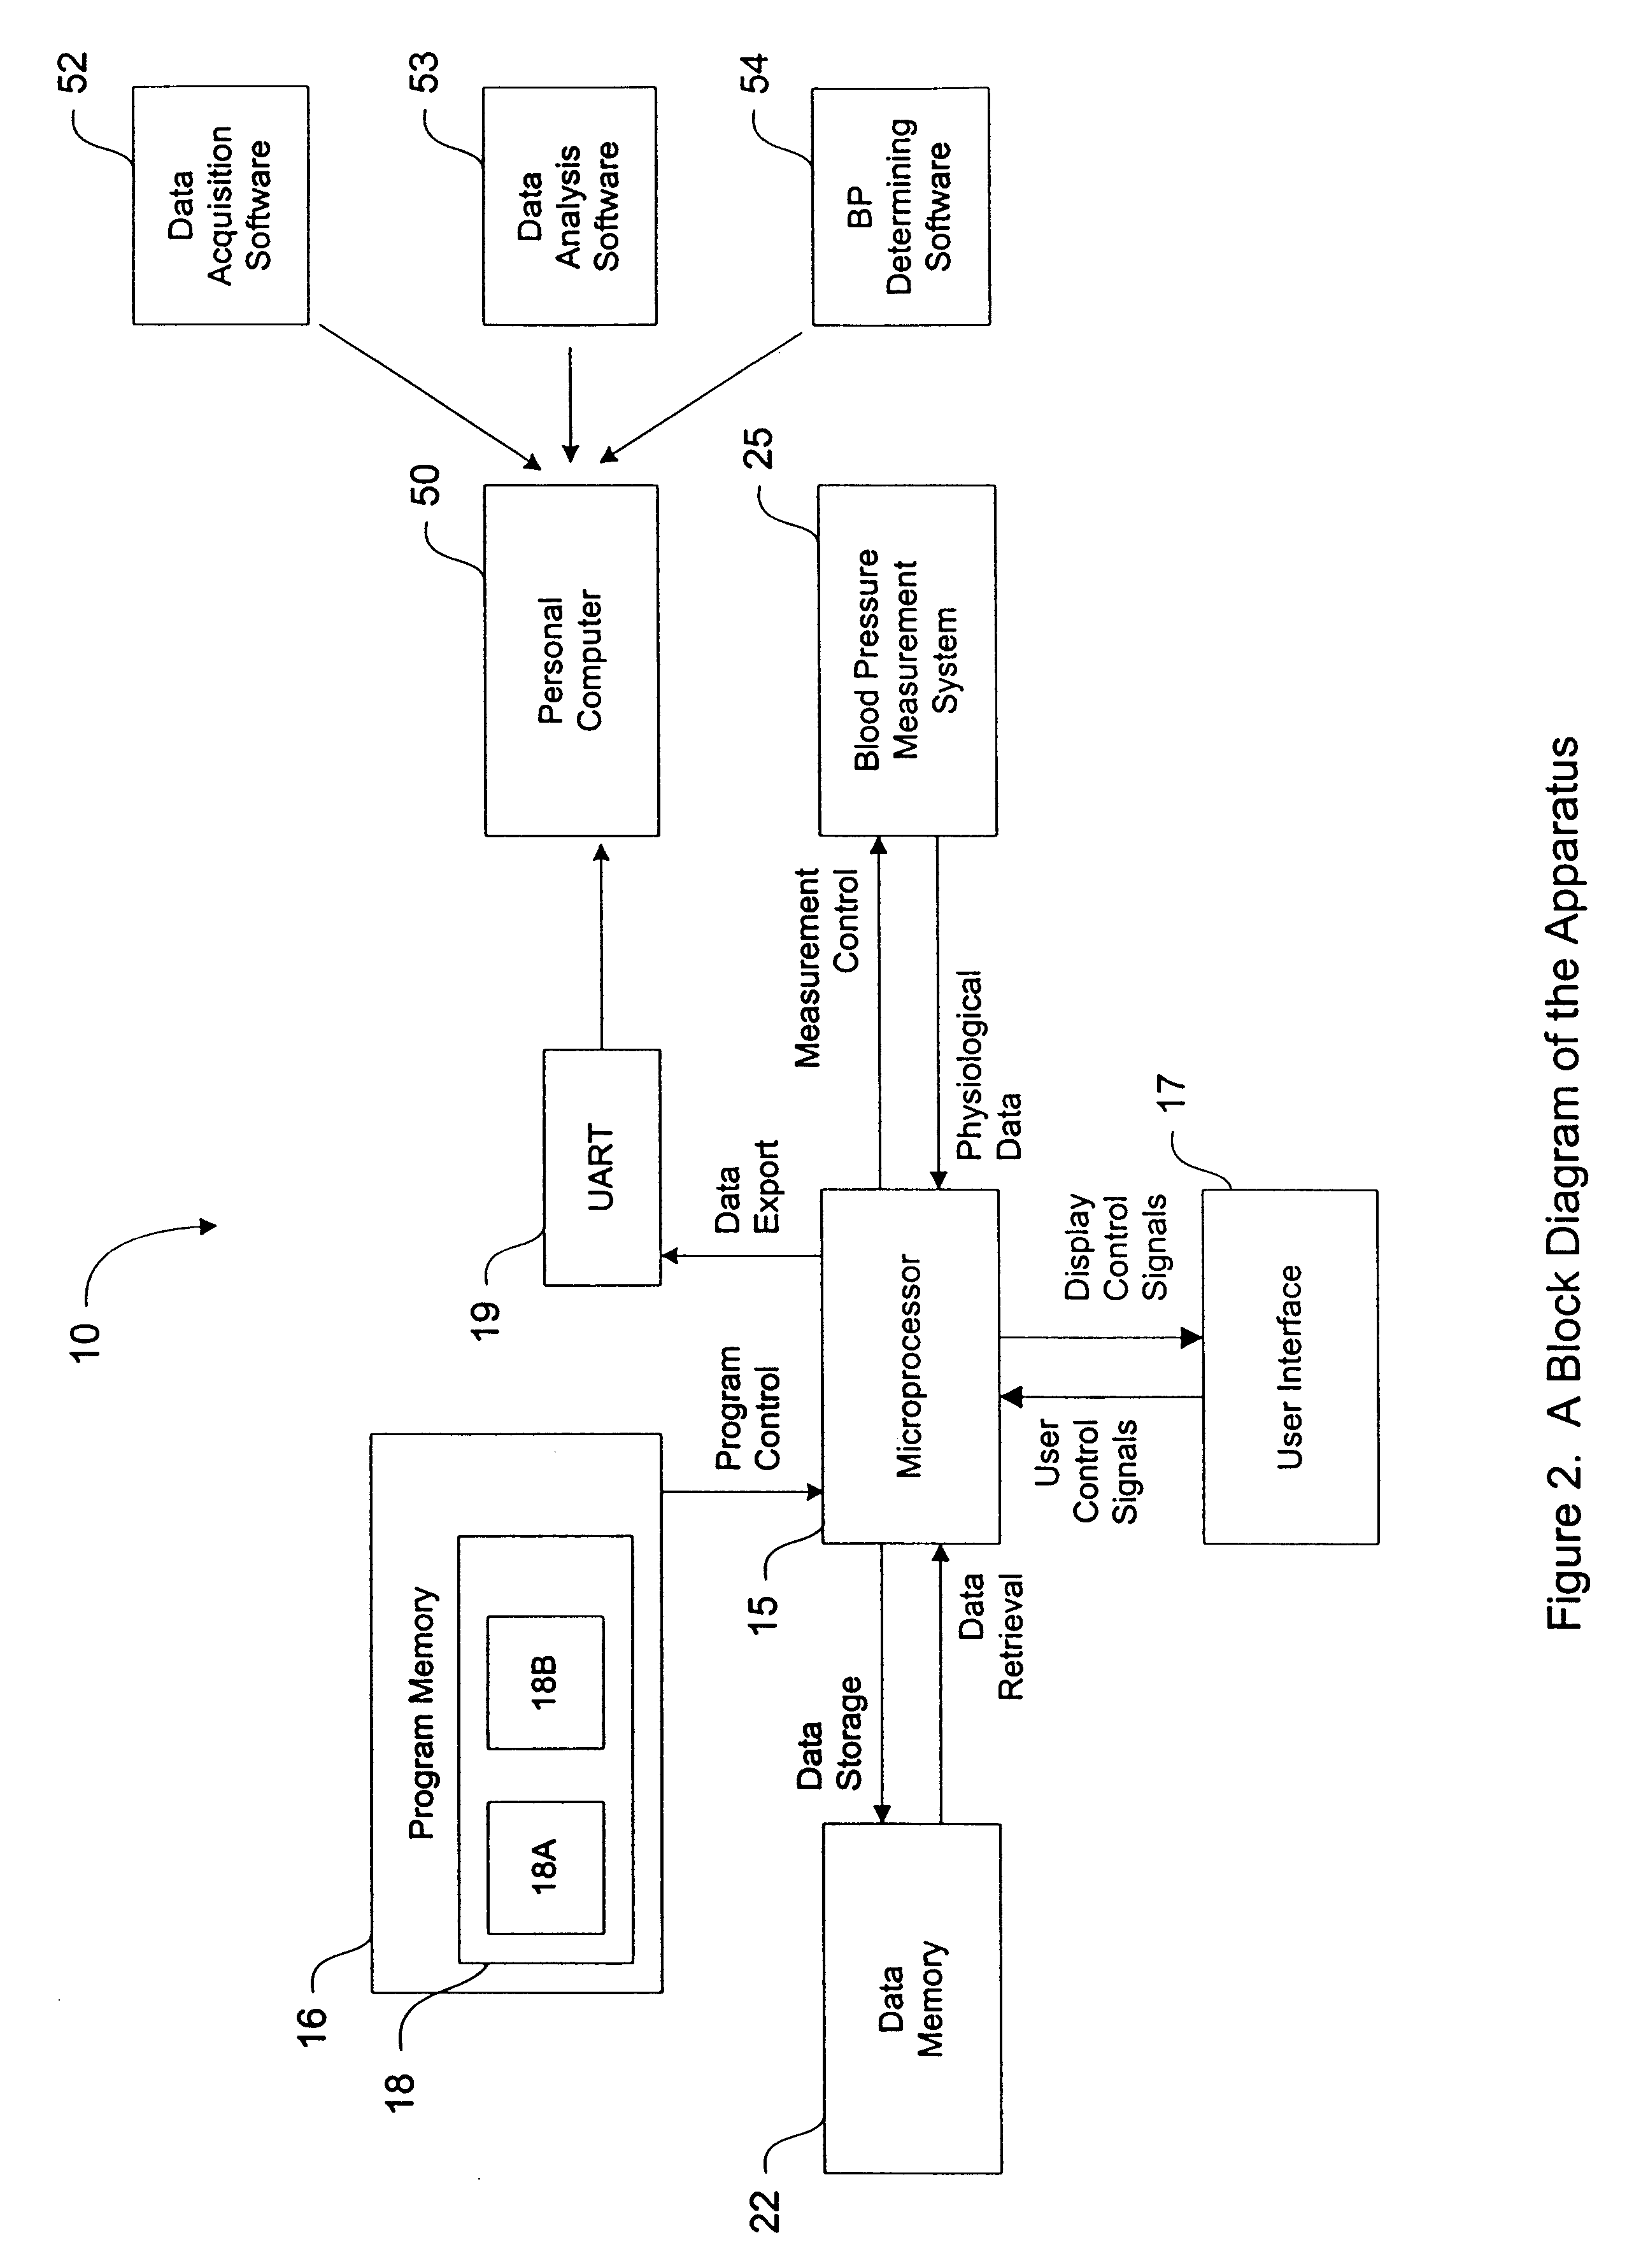 Method and apparatus for measuring blood pressure by the oscillometric technique